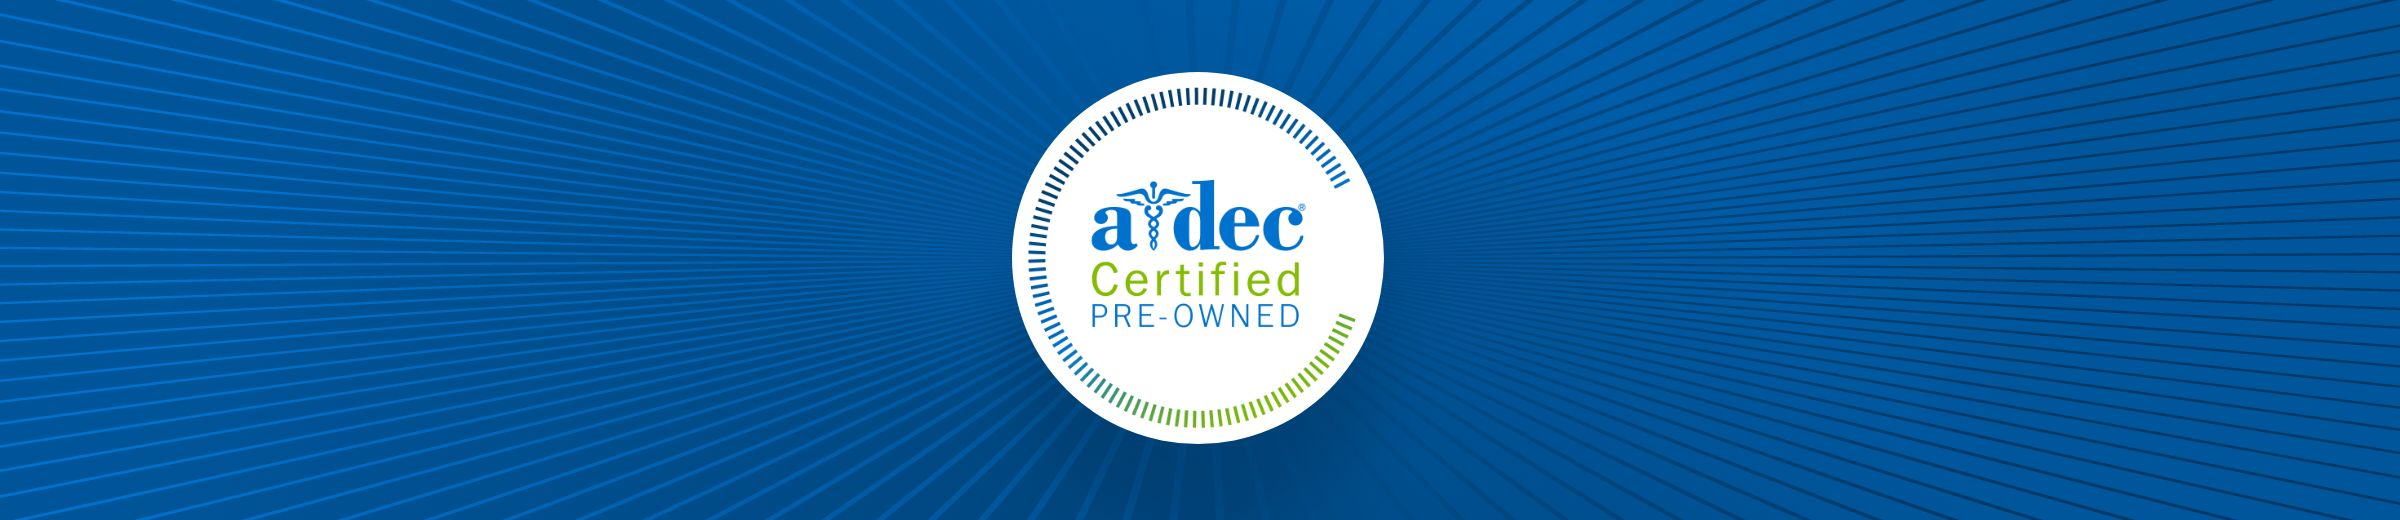 A-dec Certified Pre-Owned dental equipment banner